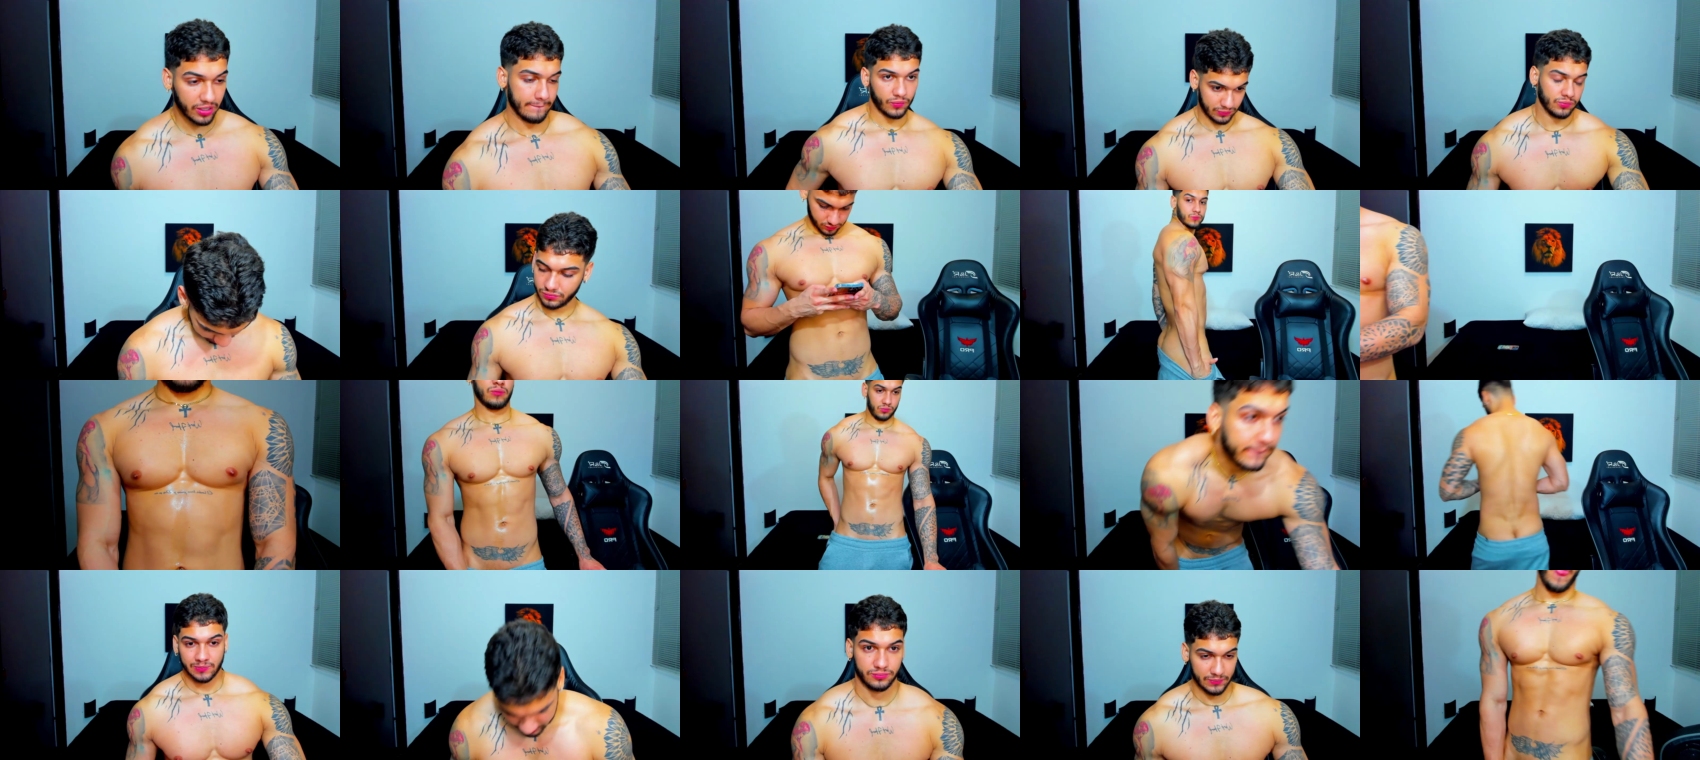 king_of_kings__ kink CAM SHOW @ Chaturbate 08-12-2022